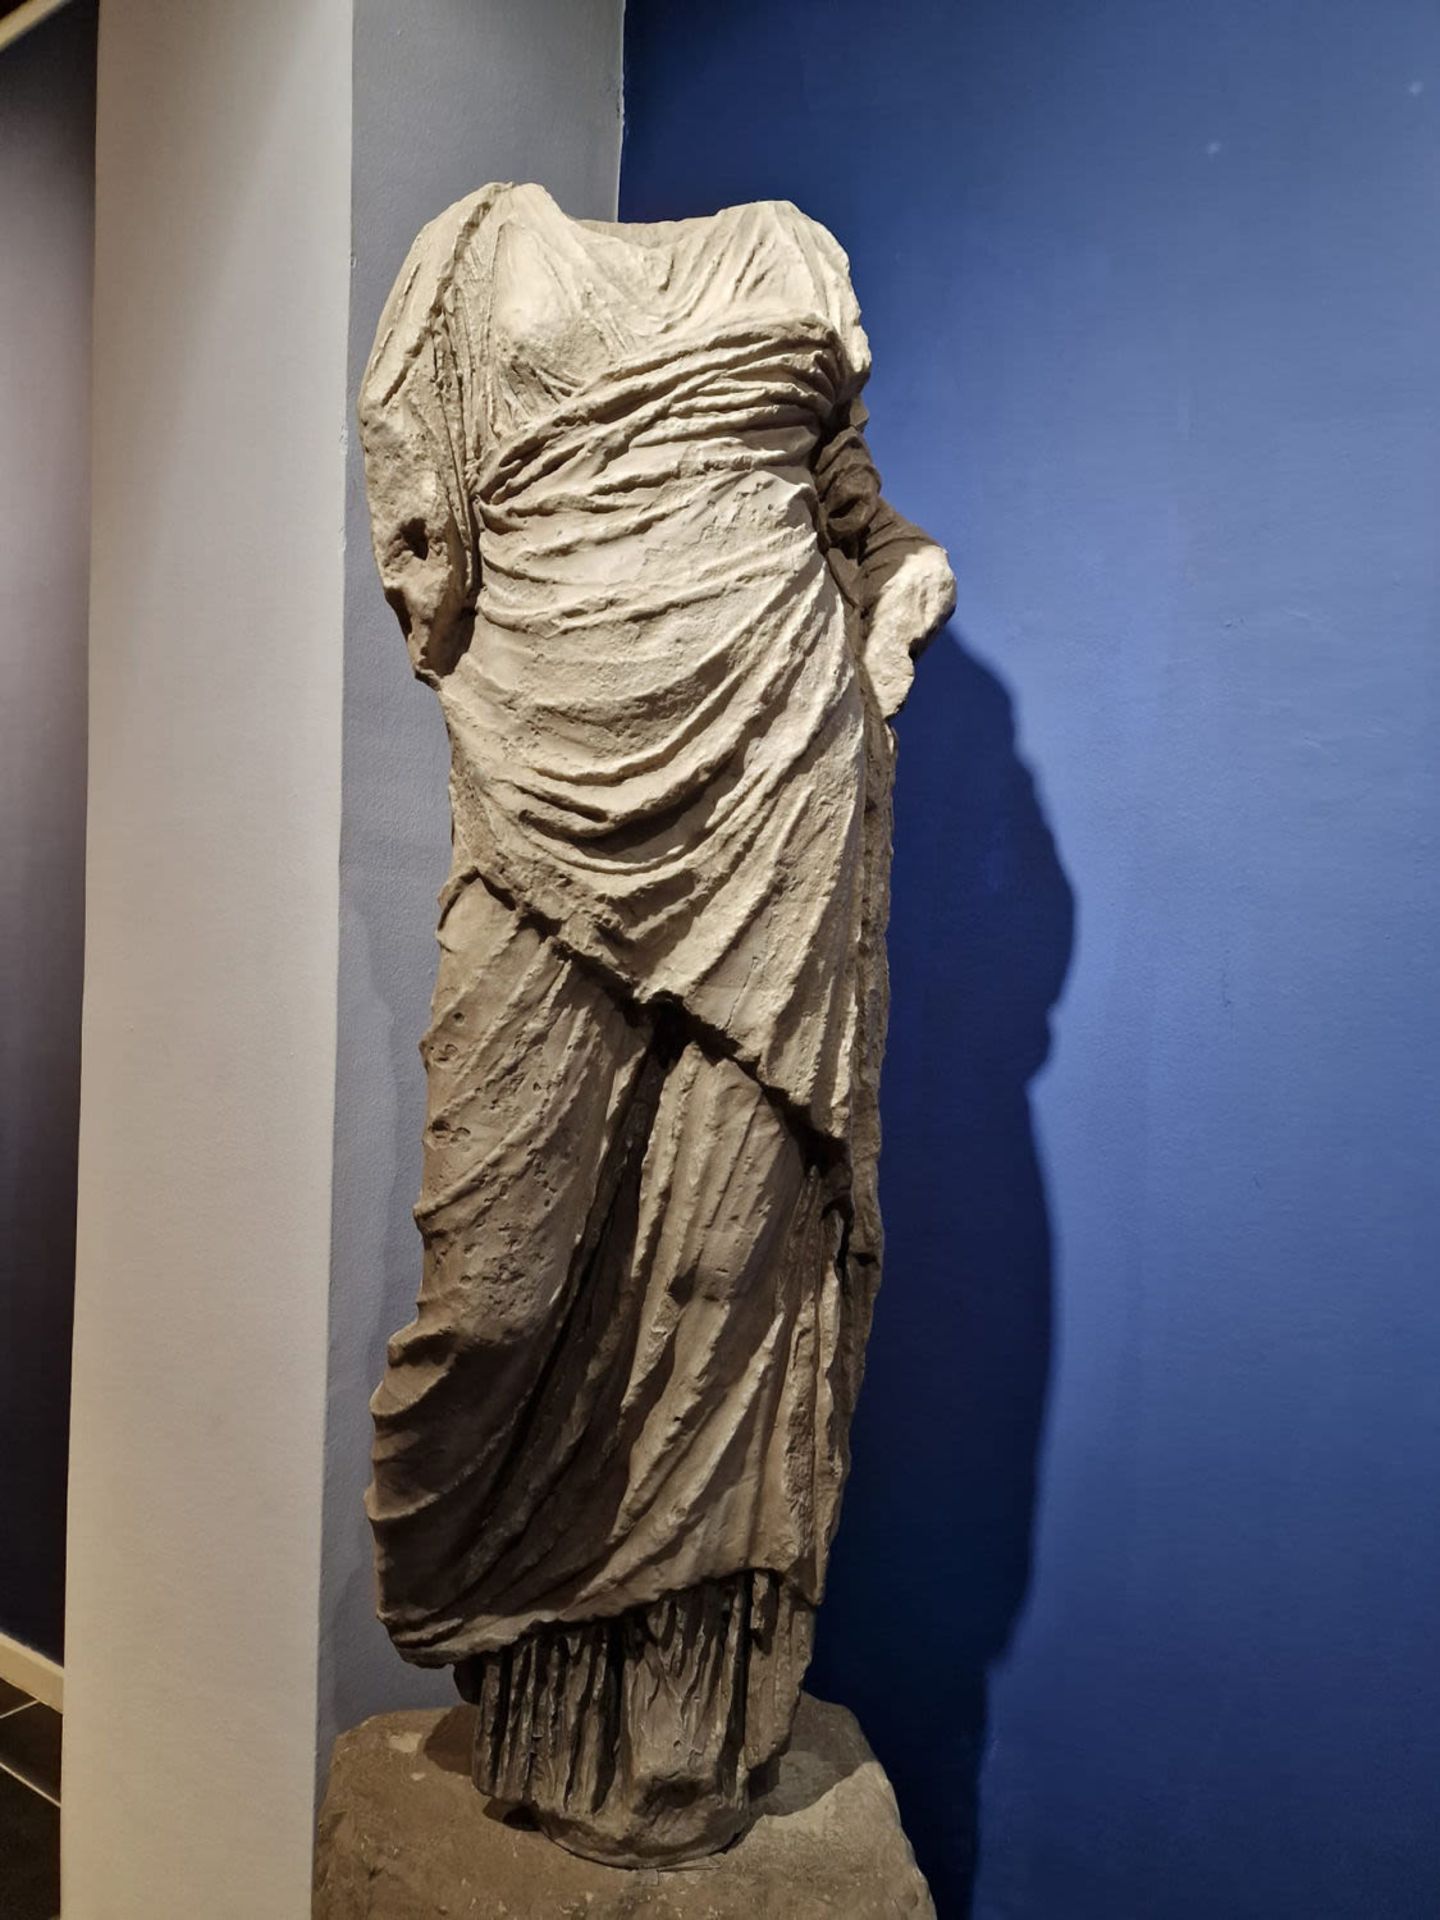 Goddess Tanit in Marble dust, following Classic Roman models, 20th century - Image 4 of 6